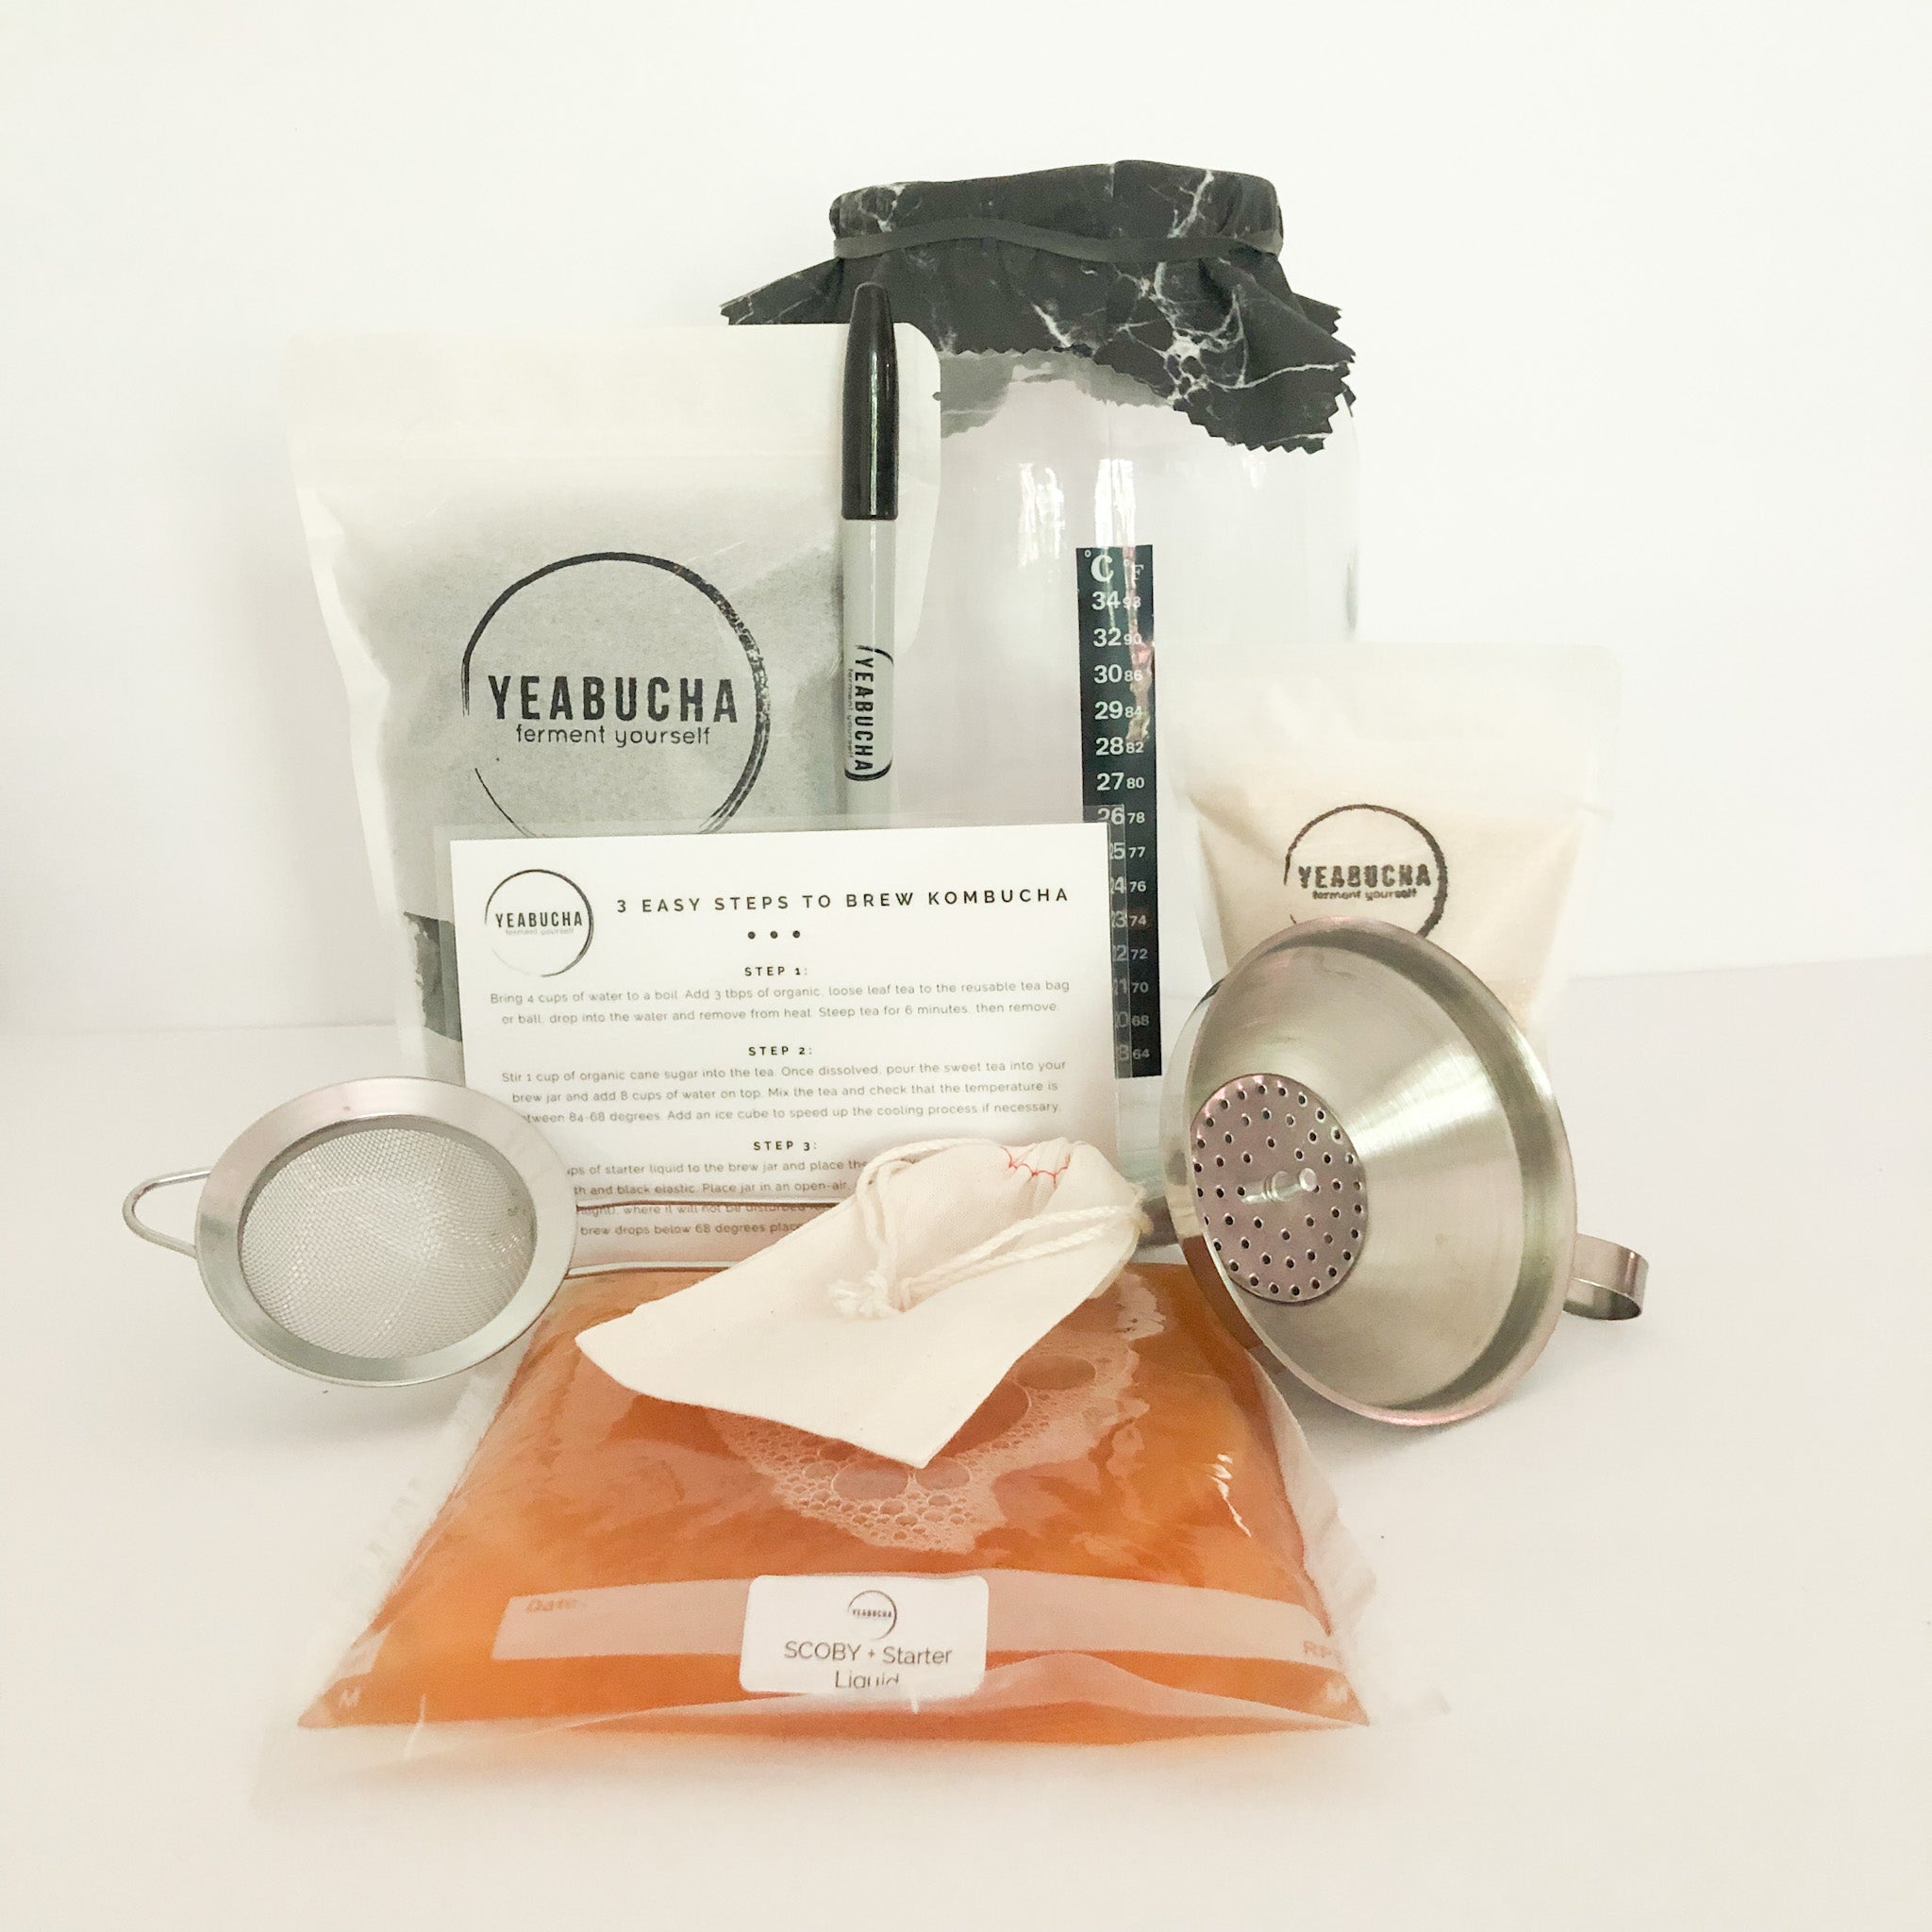 YEABUCHA Essential Home Brew Kombucha Kit. includes: SCOBY, loose leaf Tea, organic sugar, and everything needed to start brewing.